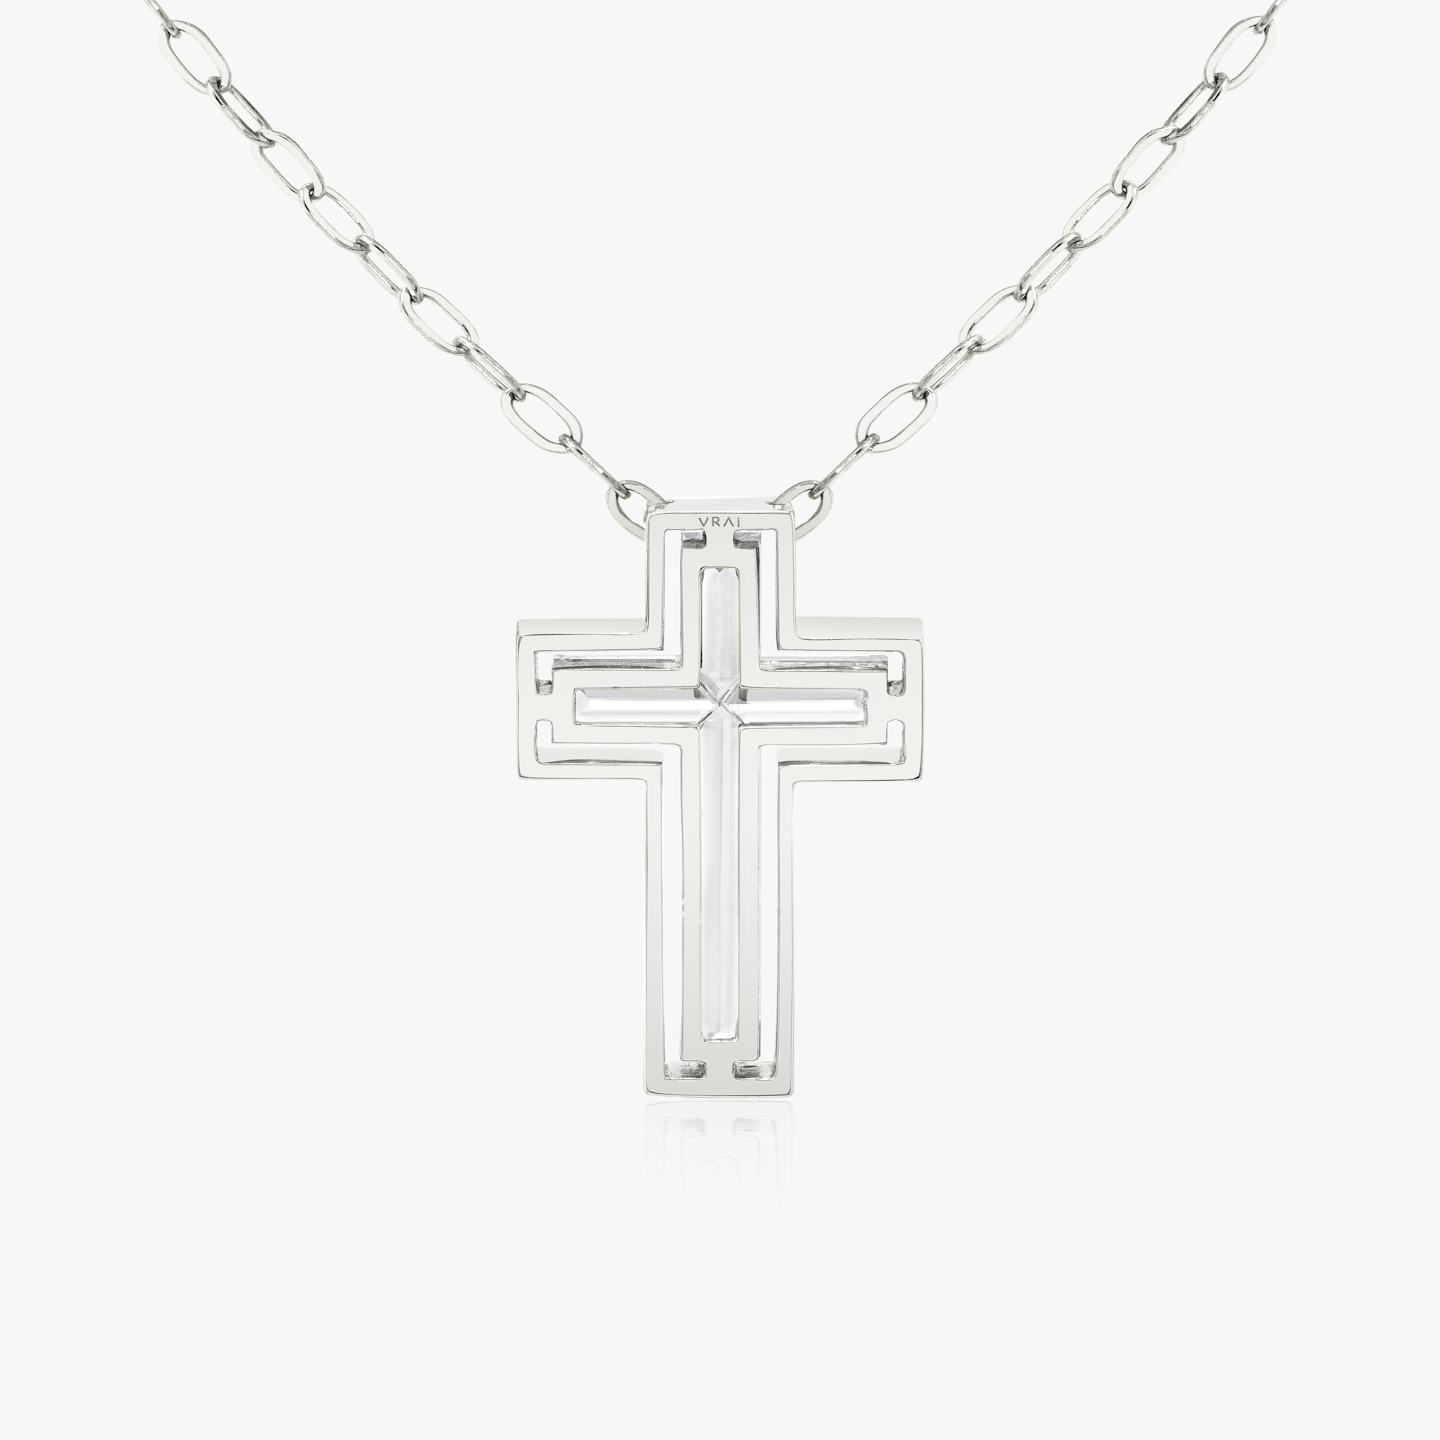 Suspended Solitaire Cross | Platinum | Chain length: 18-20